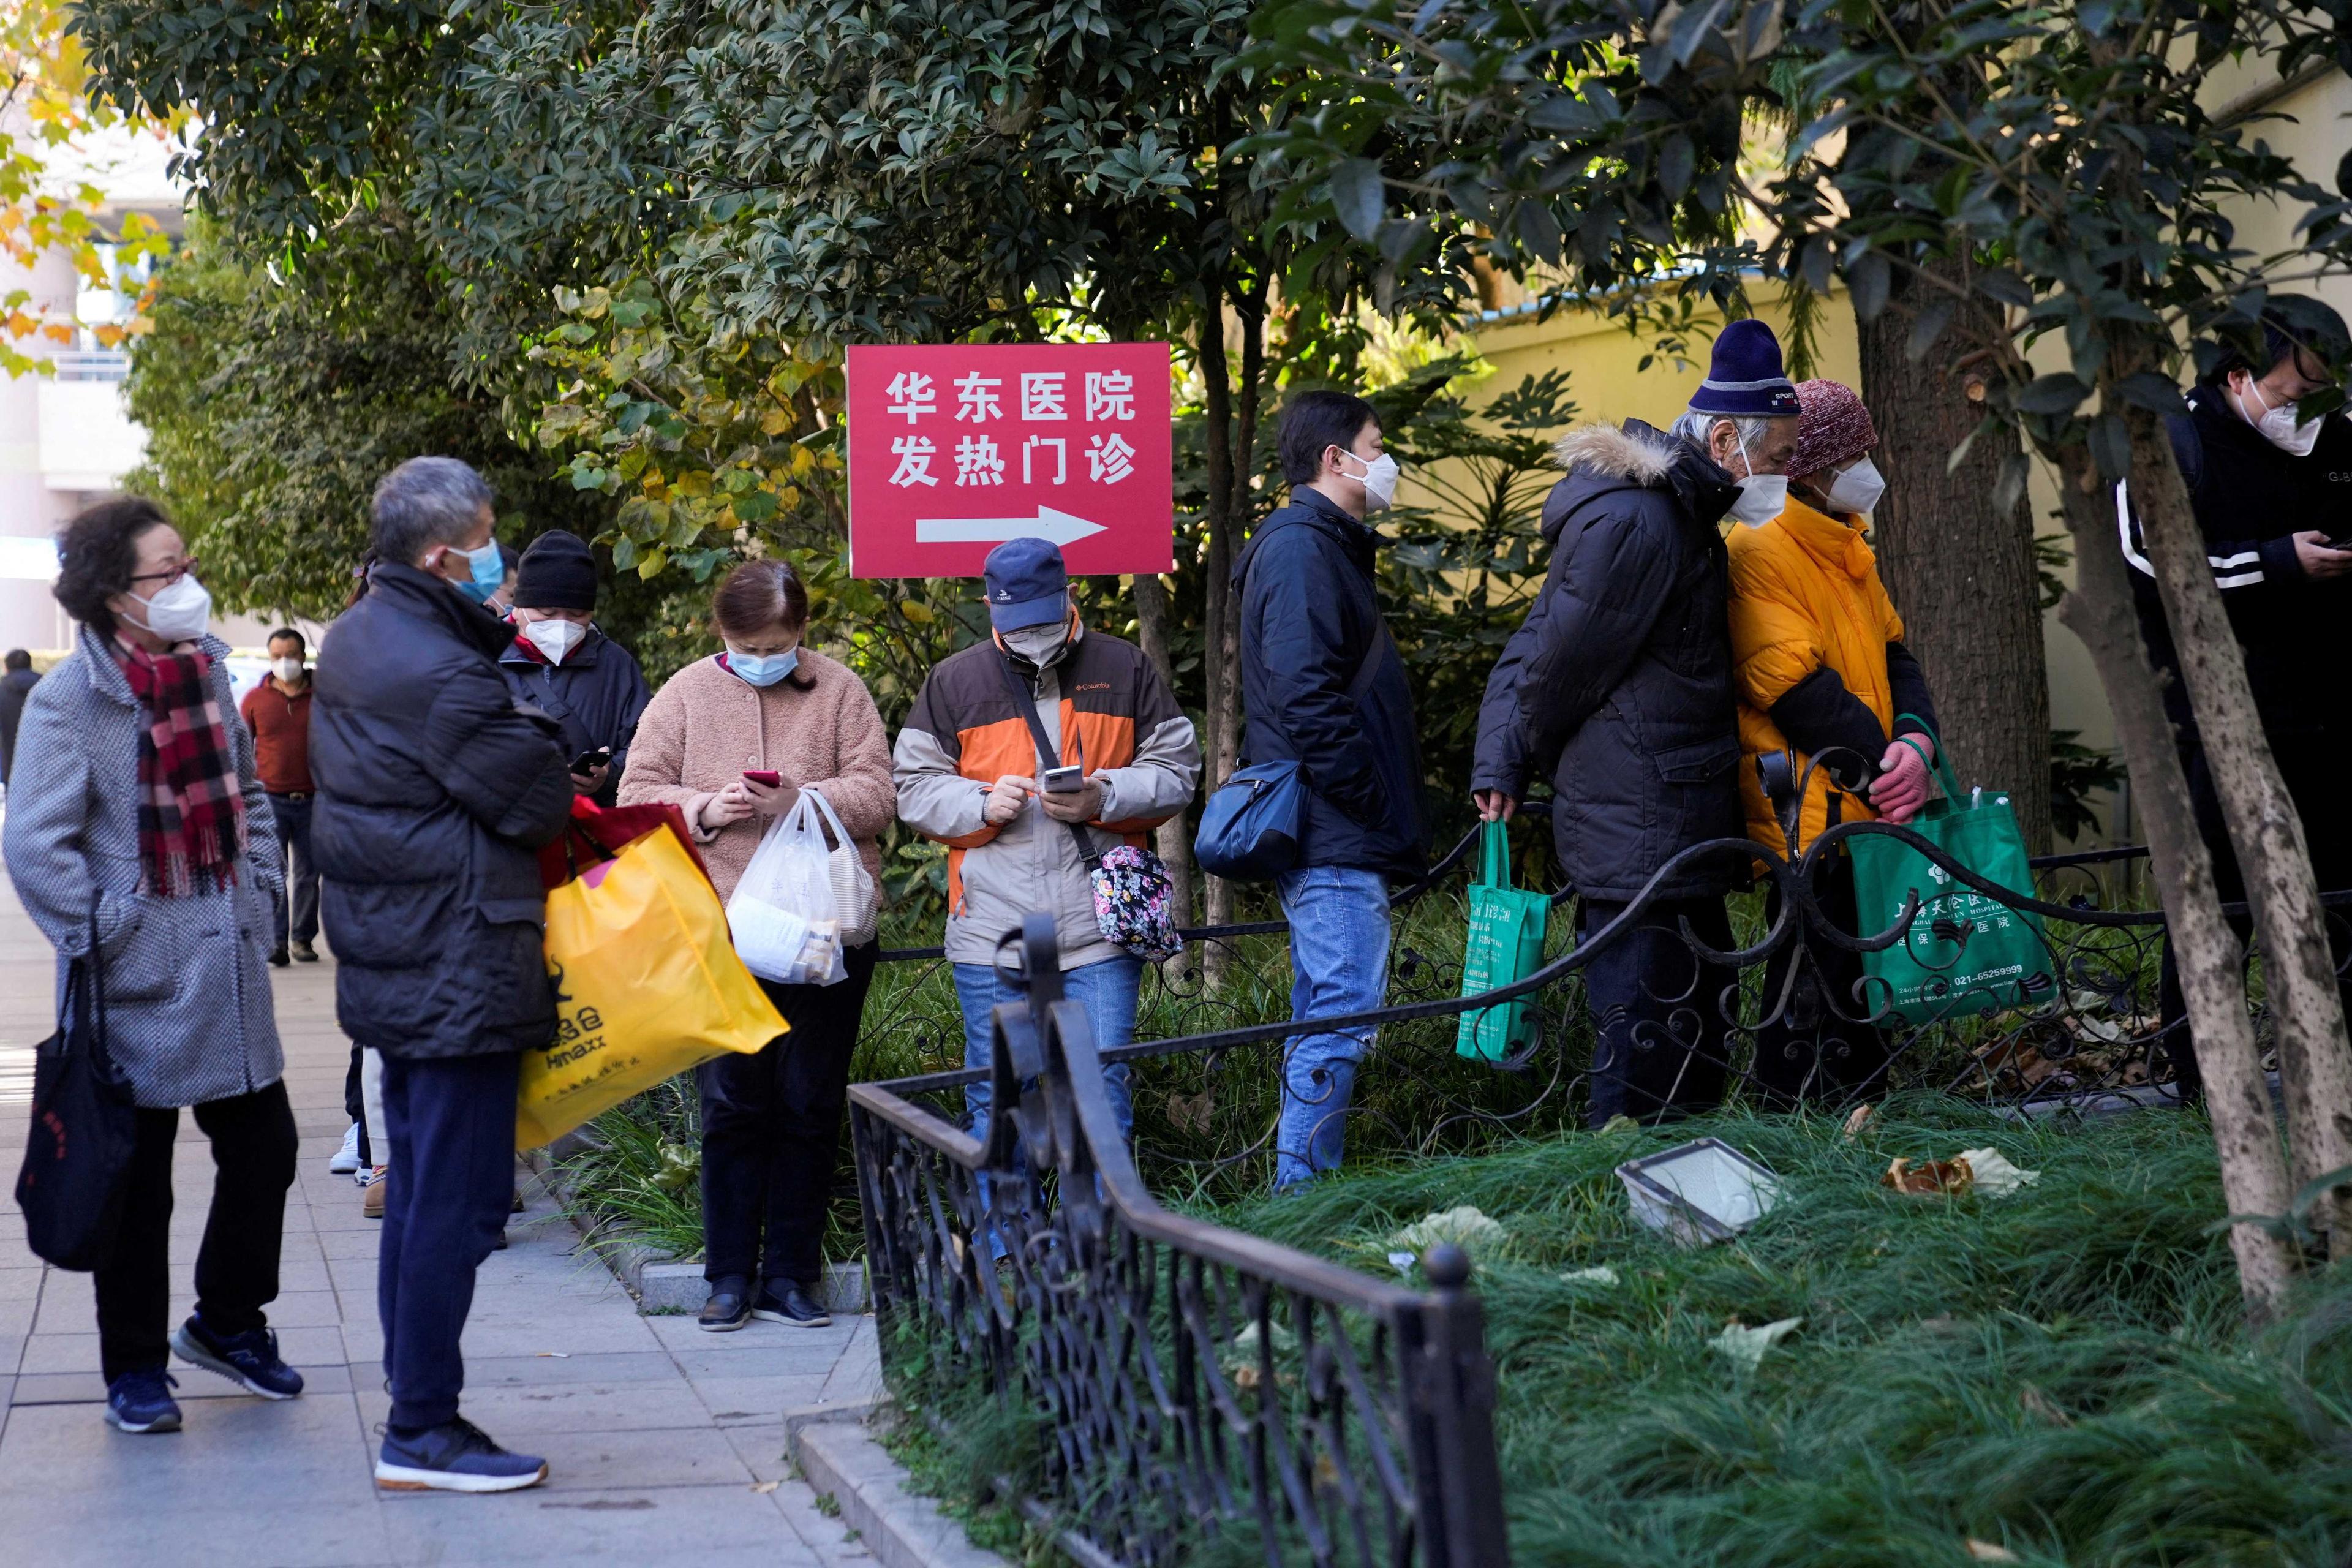 People wearing protective masks line up outside a fever clinic of a hospital, as Covid-19 outbreaks continue in Shanghai, China, Dec 20. Photo: Reuters